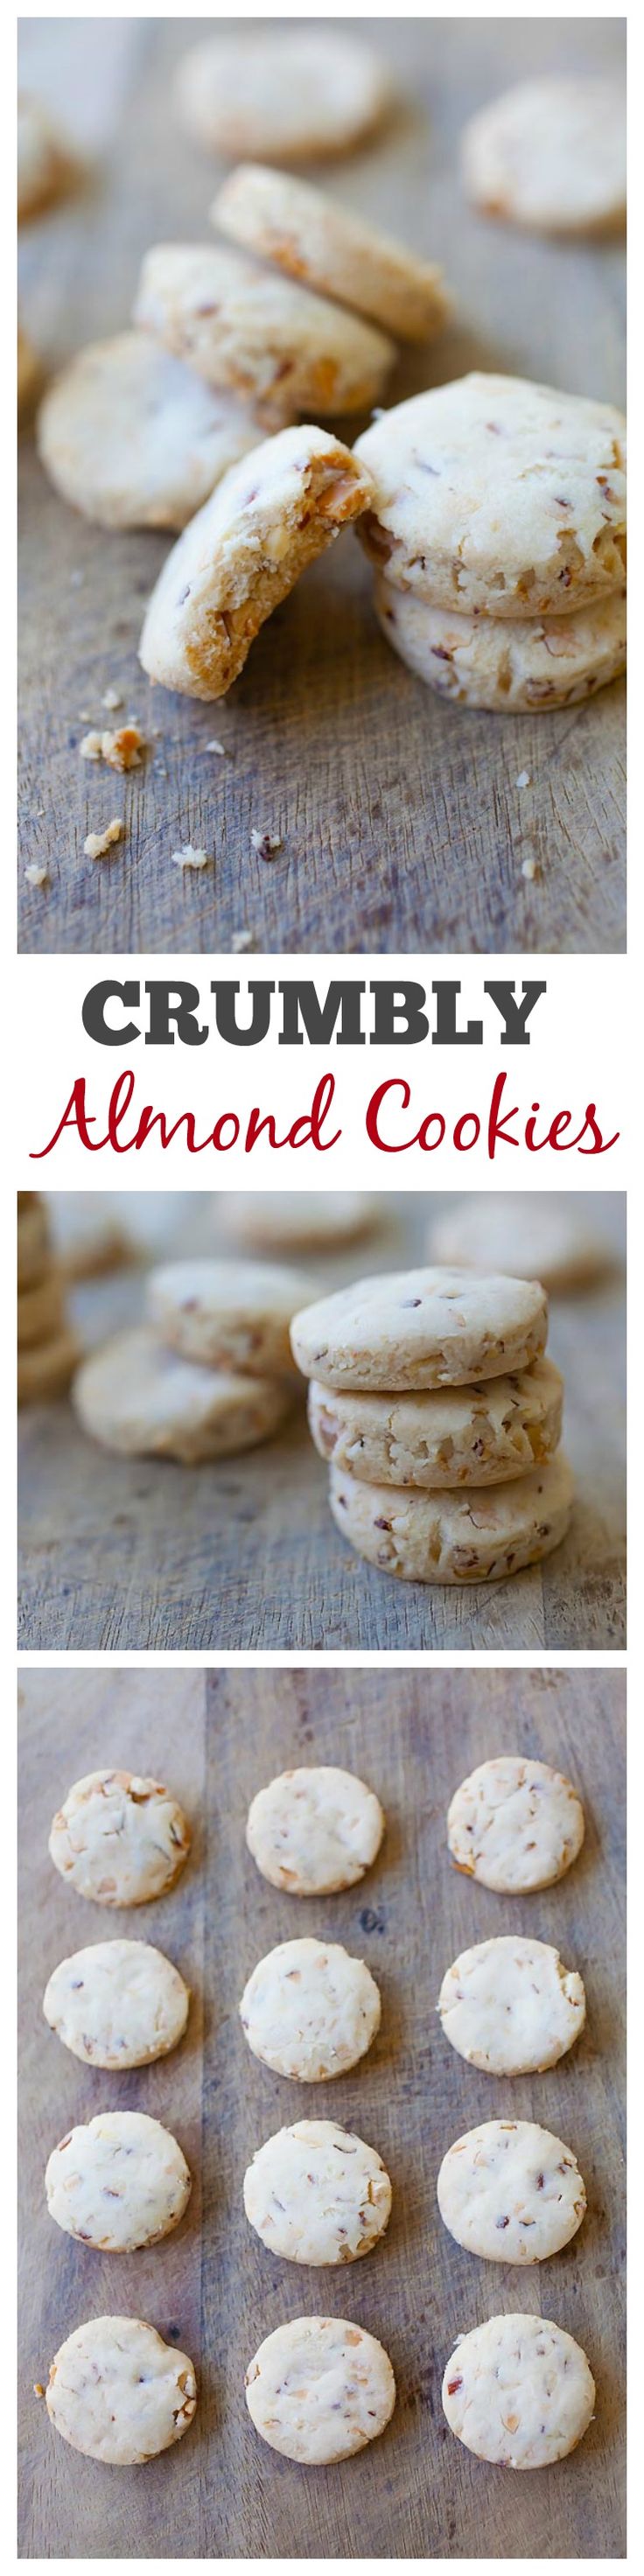 Super crumbly almond cookies with chopped almonds in the cookies. They're so good you won't stop eating | rasamalaysia.com